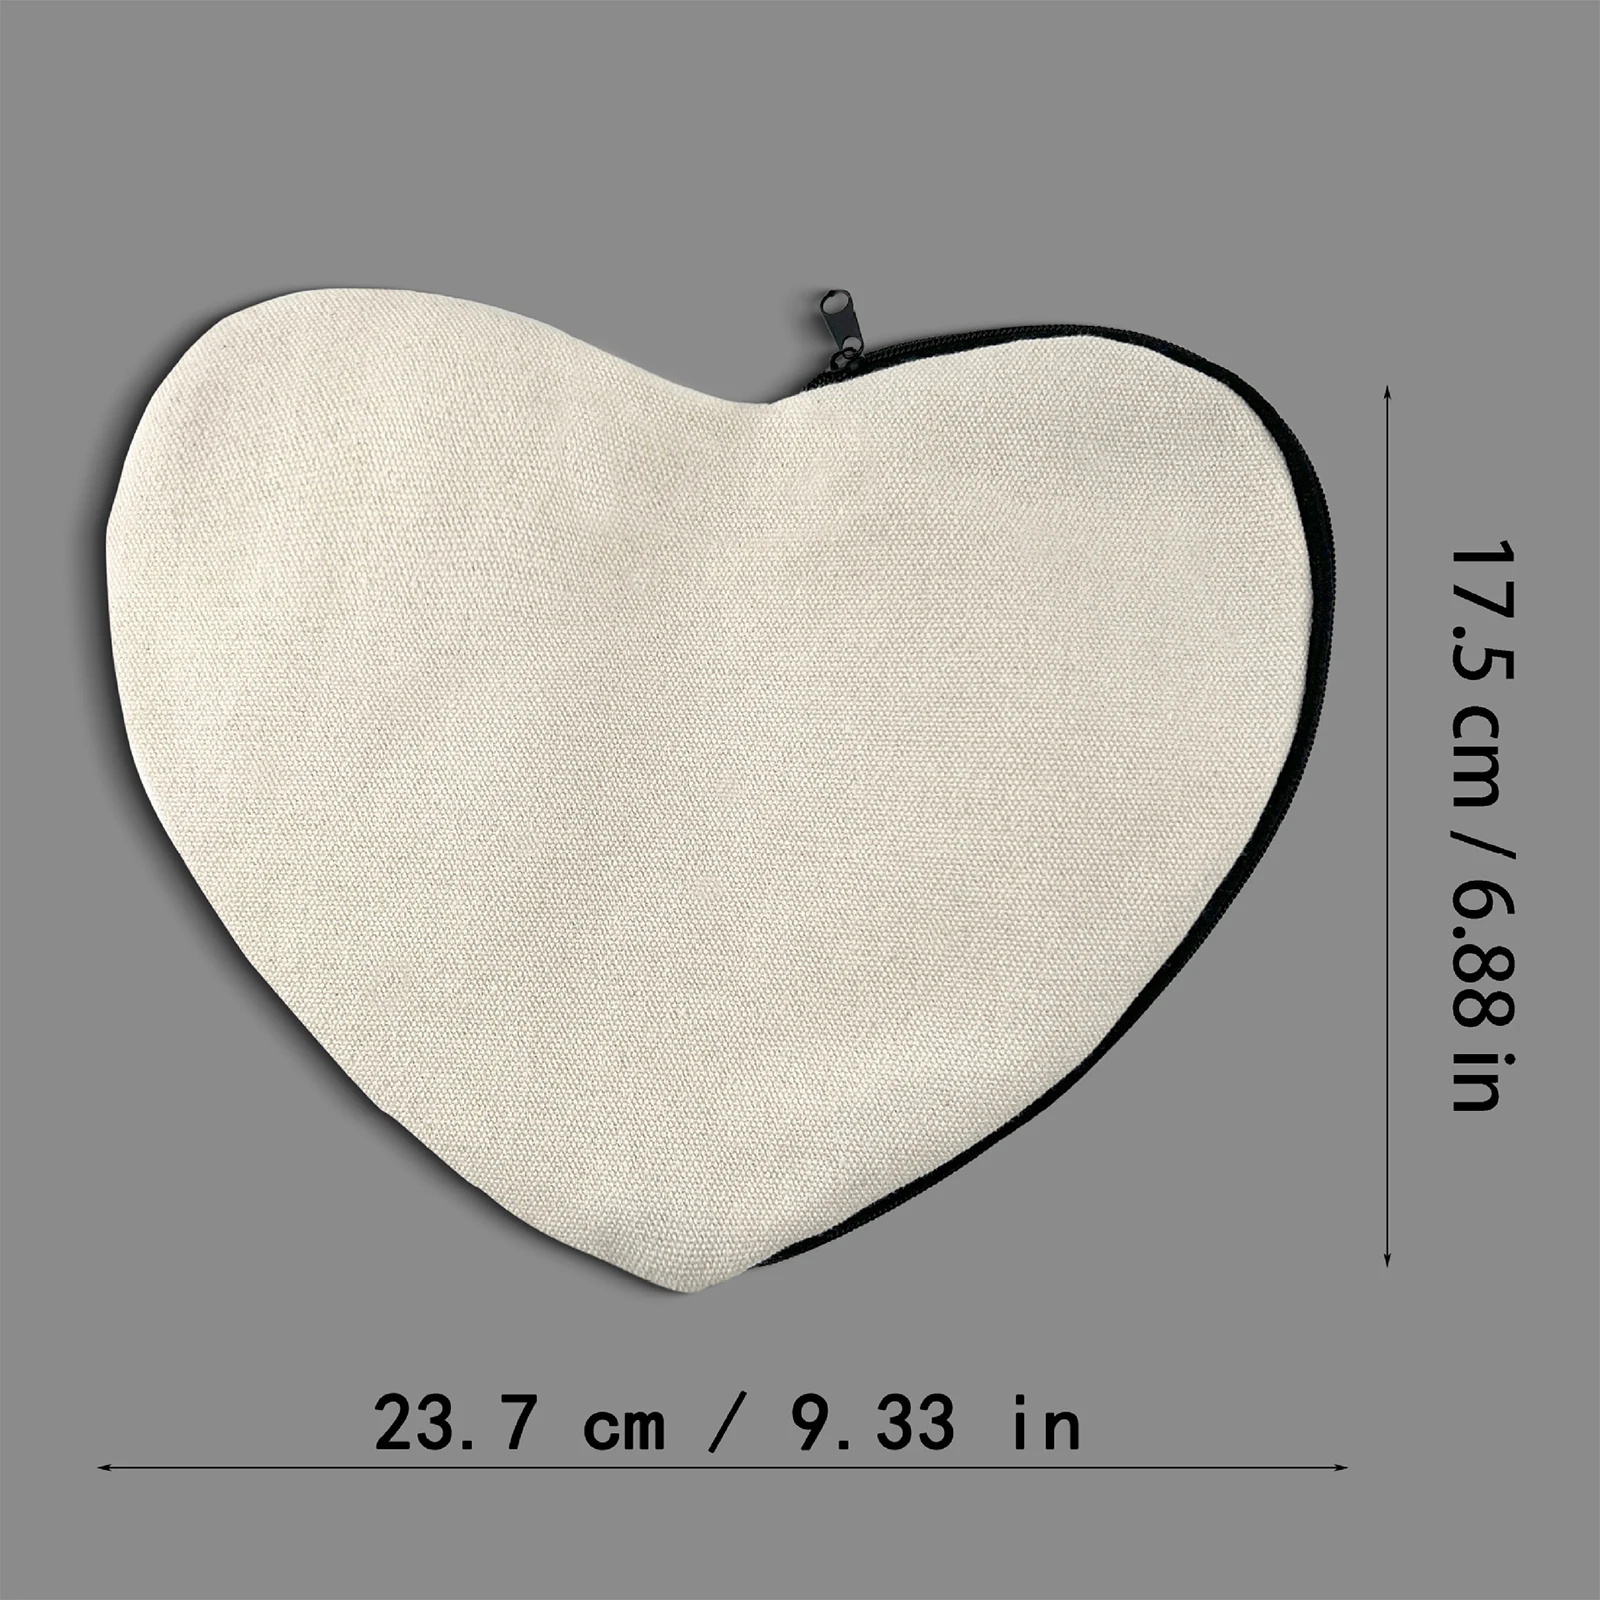 6x Blank DIY Craft Bags with Zipper Canvas Pencil Bag Heart Shaped Cosmetic Bag Makeup Bags Multipurpose for Stationery Storage images - 6